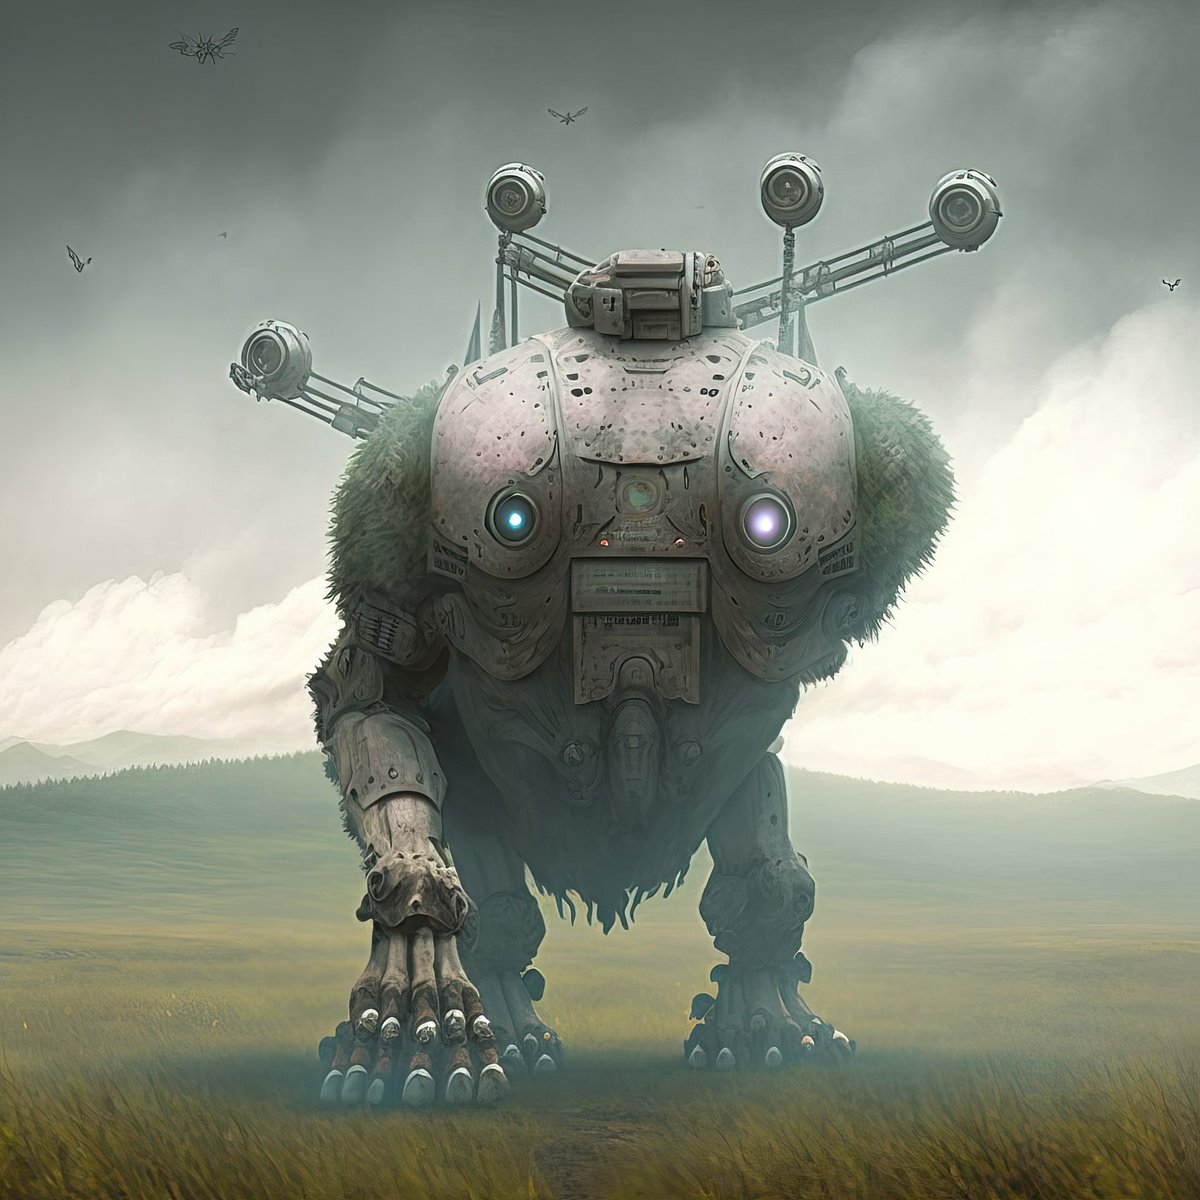 'Imagine a giant, sentient robot that can change into any animal form it desires, roaming the earth and protecting the planet from danger.'

#robot #sentientrobot #animalform #protection #earth #aiart #artificialintelligence #digitalart #art #ai #midjourney #stablediffusion